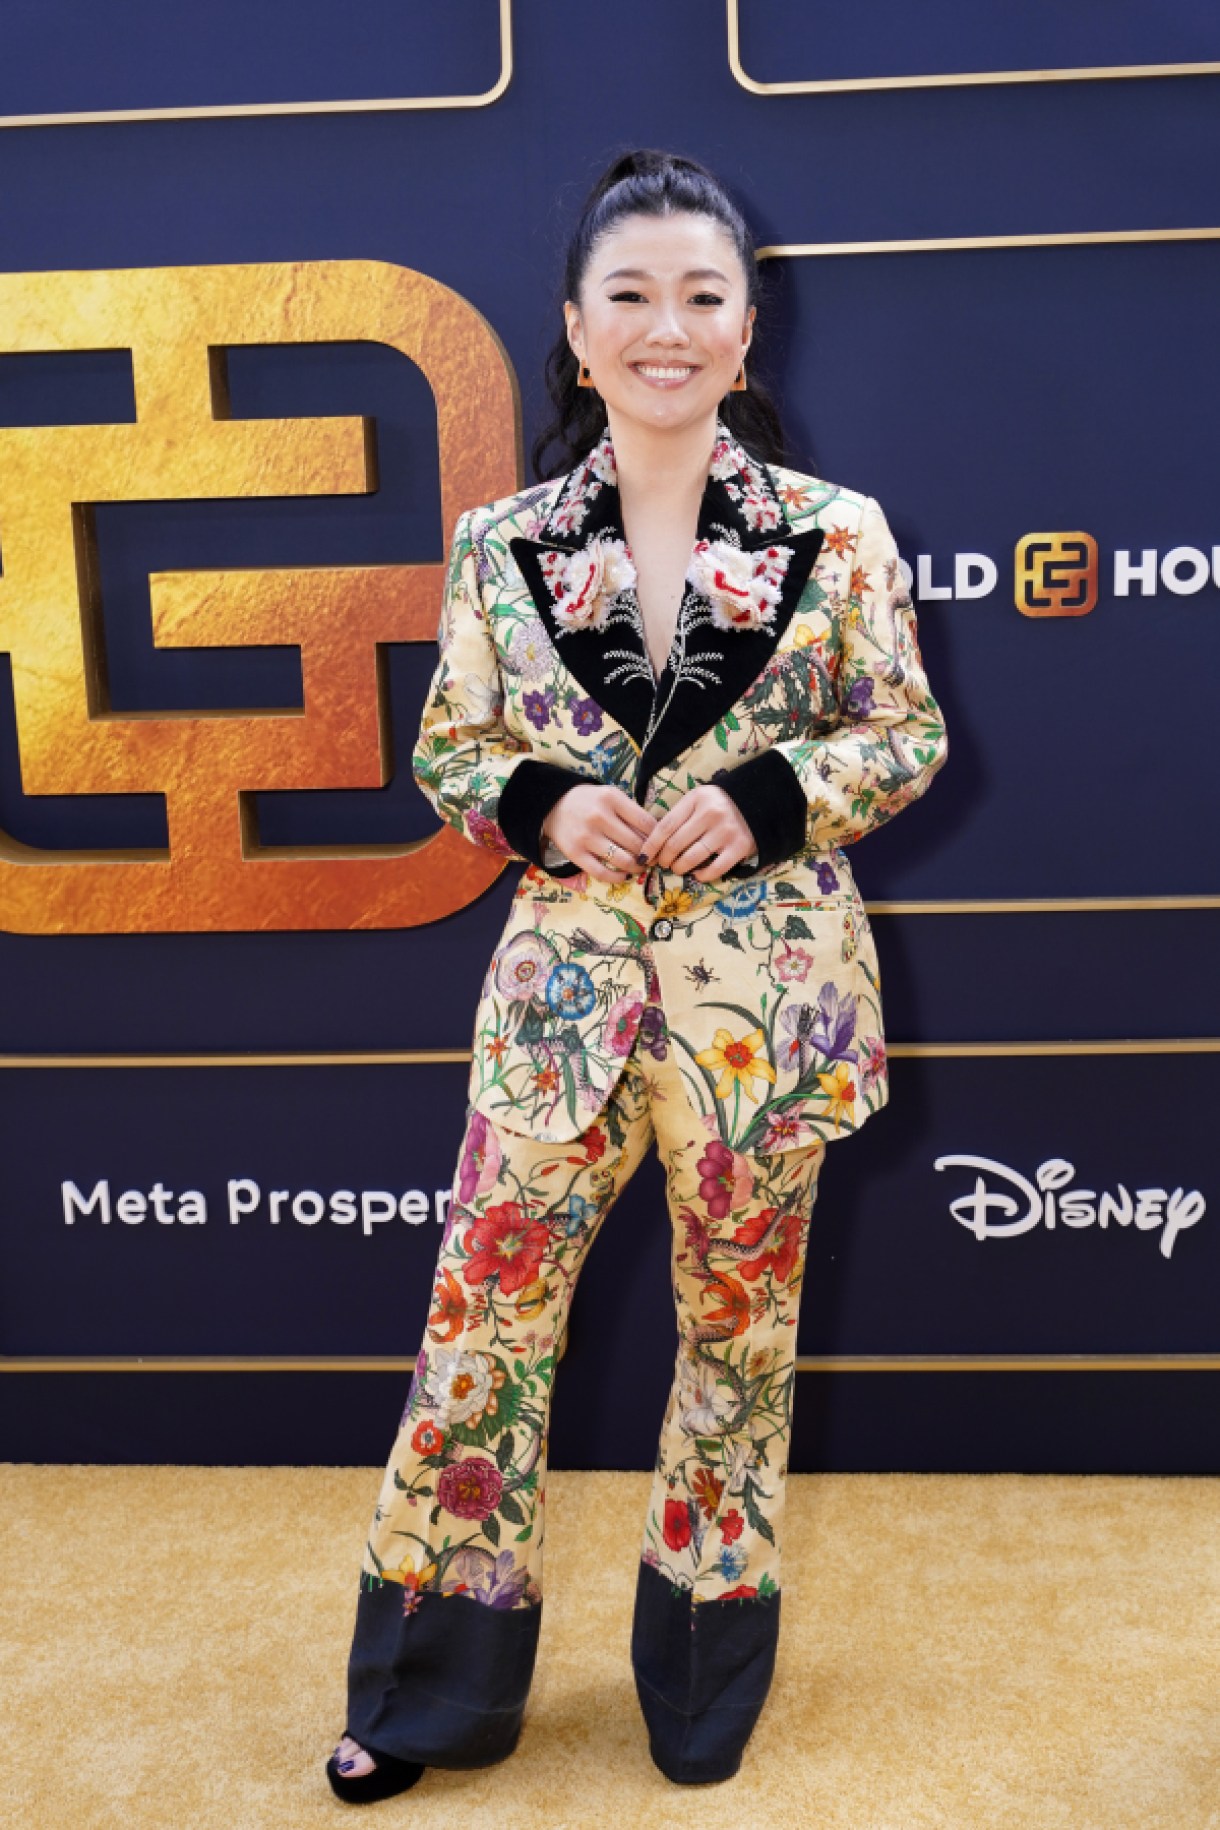 LOS ANGELES, CALIFORNIA - MAY 21: Sherry Cola attends Gold House's Inaugural Gold Gala: A New Gold Age at Vibiana on May 21, 2022 in Los Angeles, California. (Photo by Gonzalo Marroquin/Getty Images for Gold House)